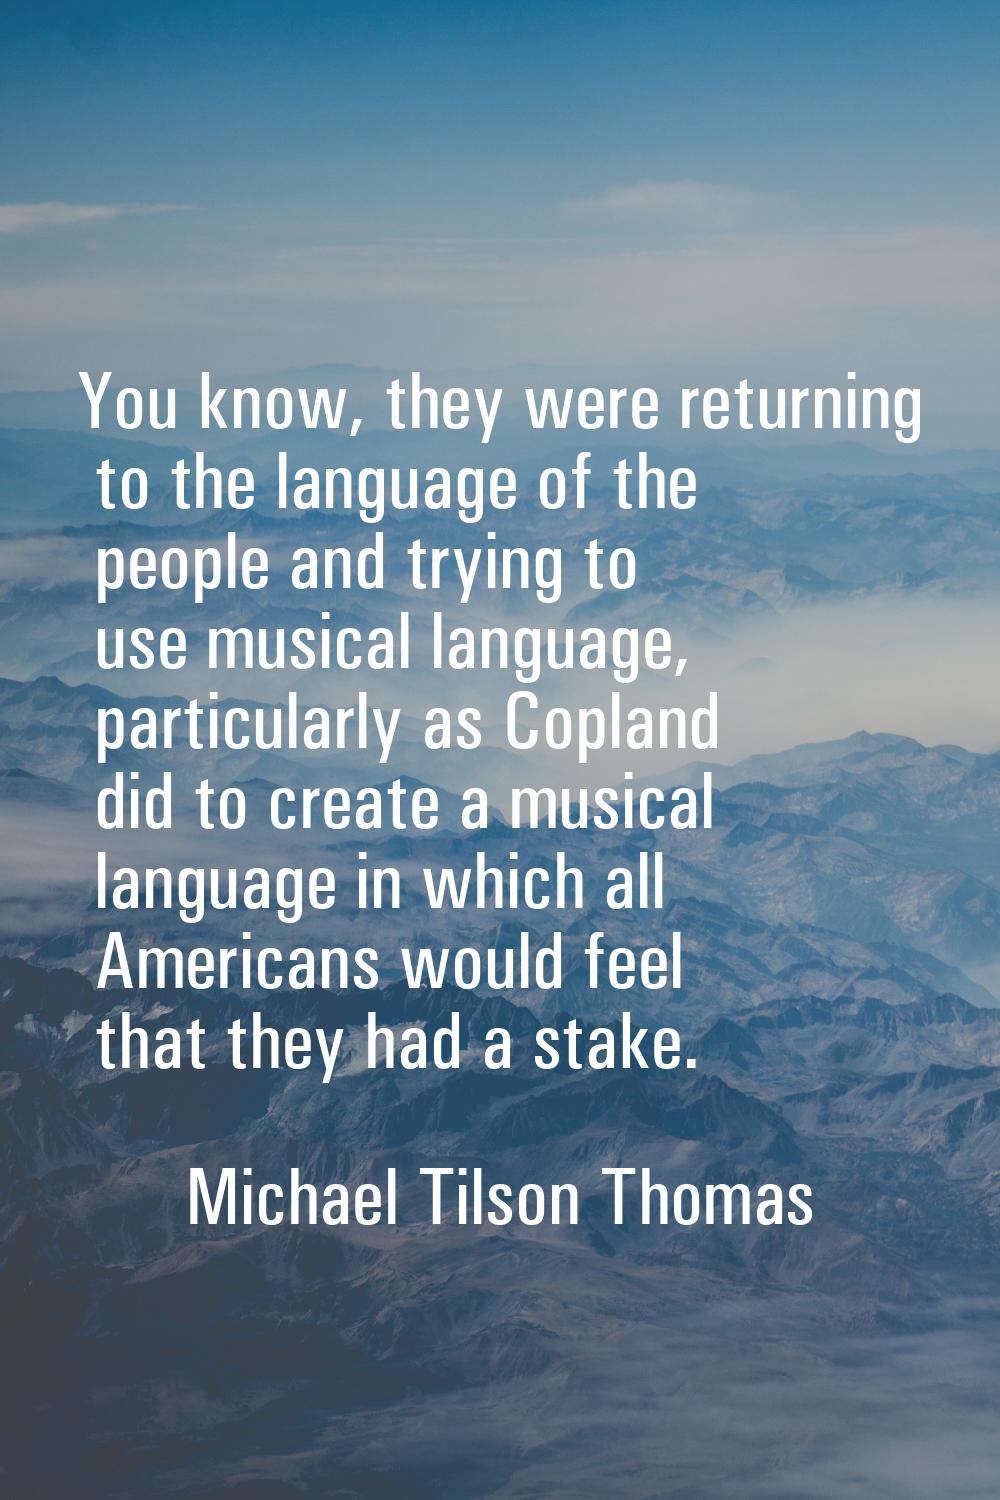 You know, they were returning to the language of the people and trying to use musical language, par